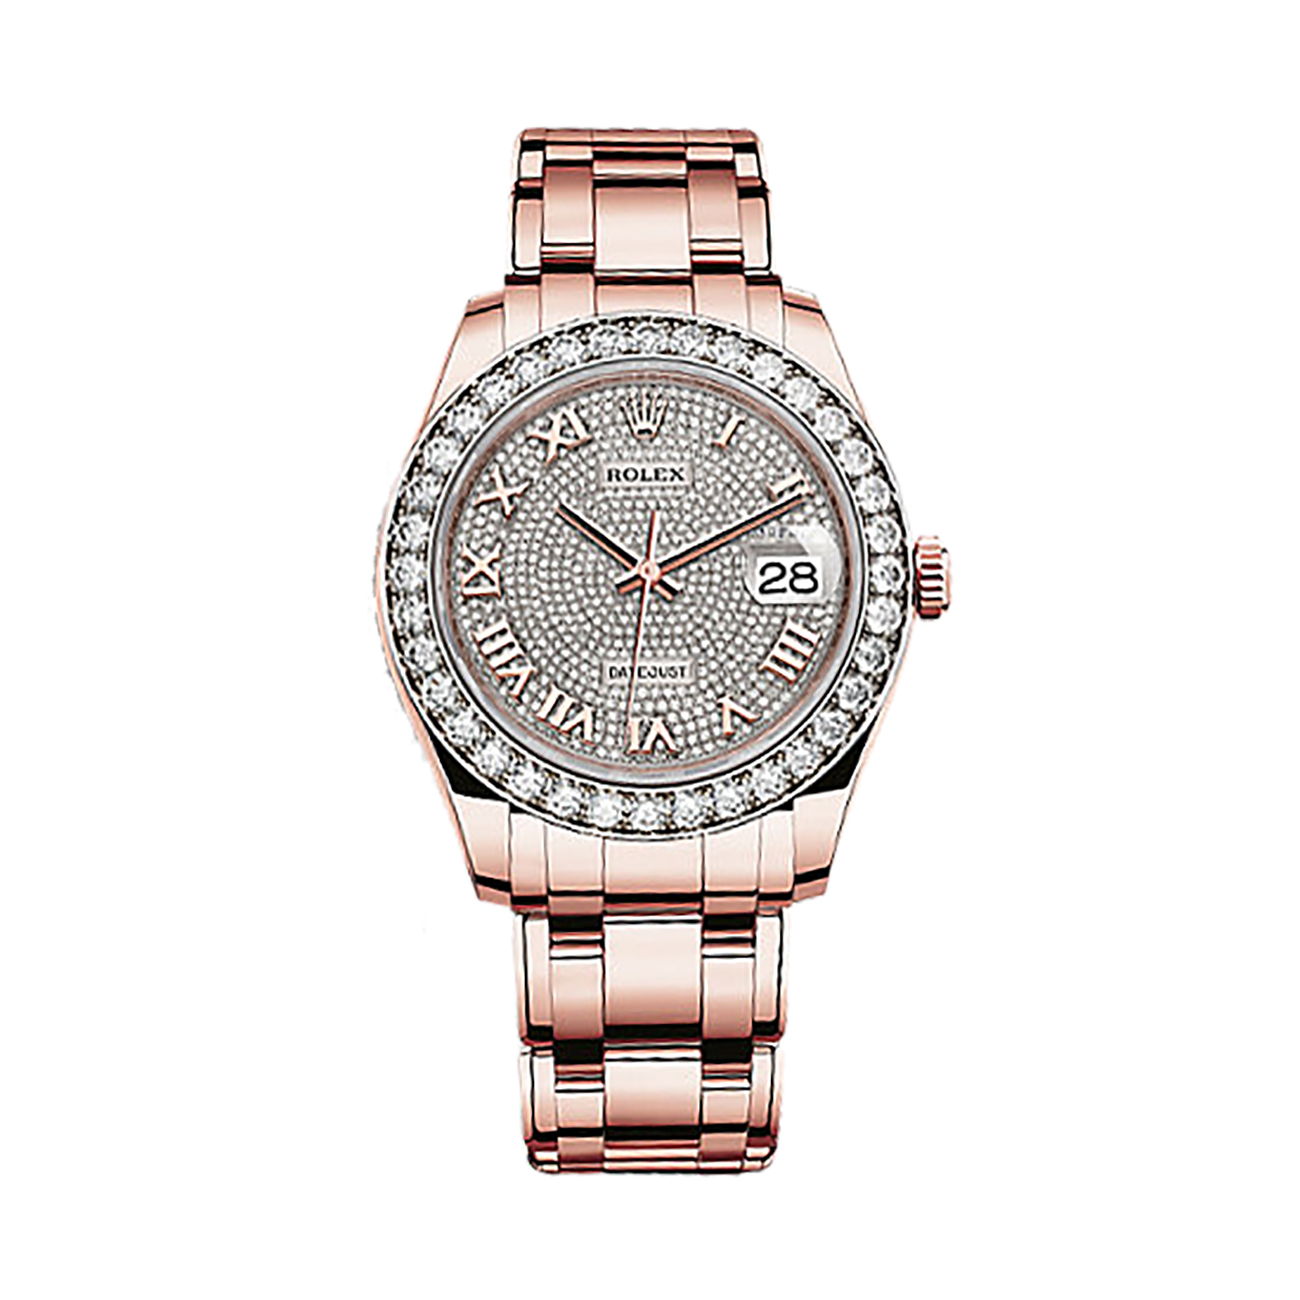 Pearlmaster 39 86285 Rose Gold & Diamonds Watch (18 ct Pink Gold Paved with 713 Diamonds)